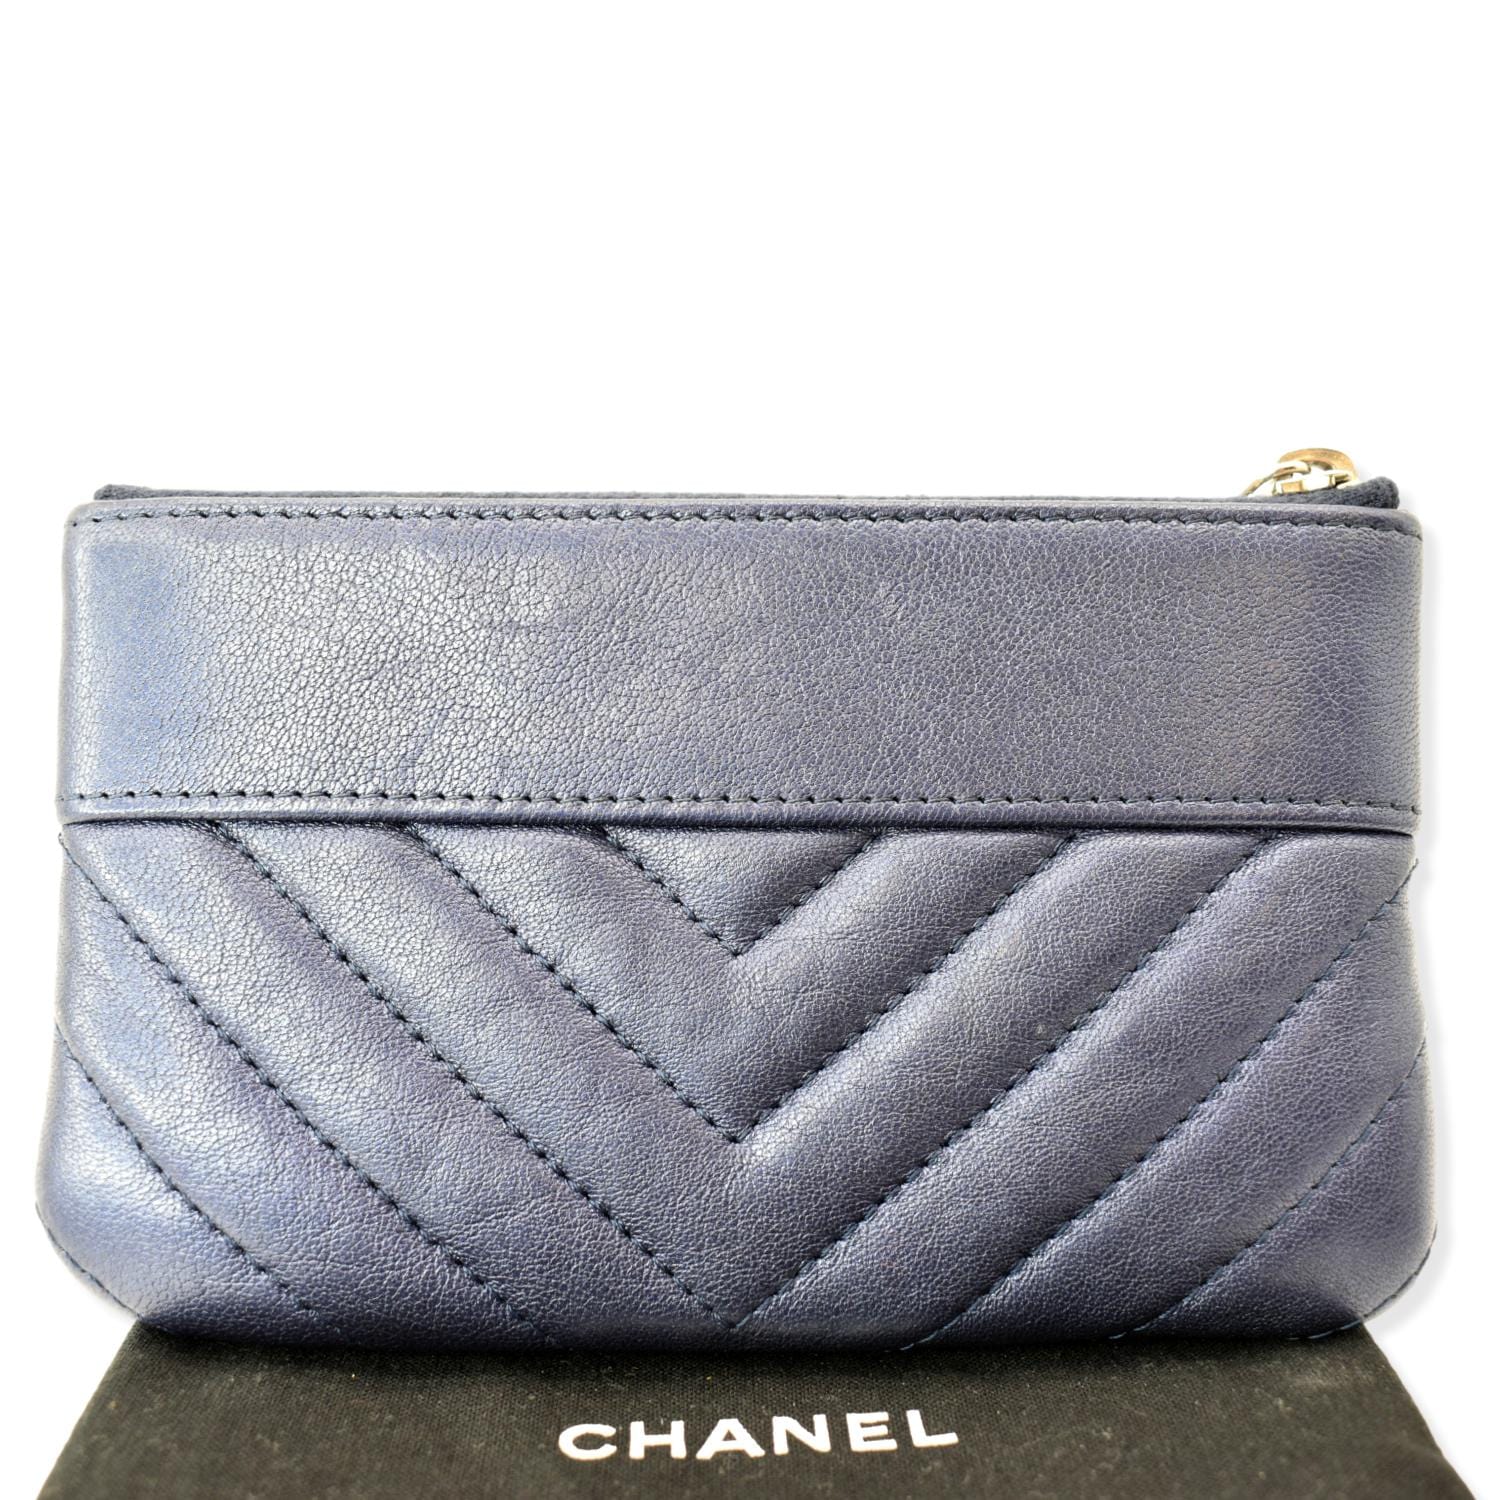 Chanel compact wallet